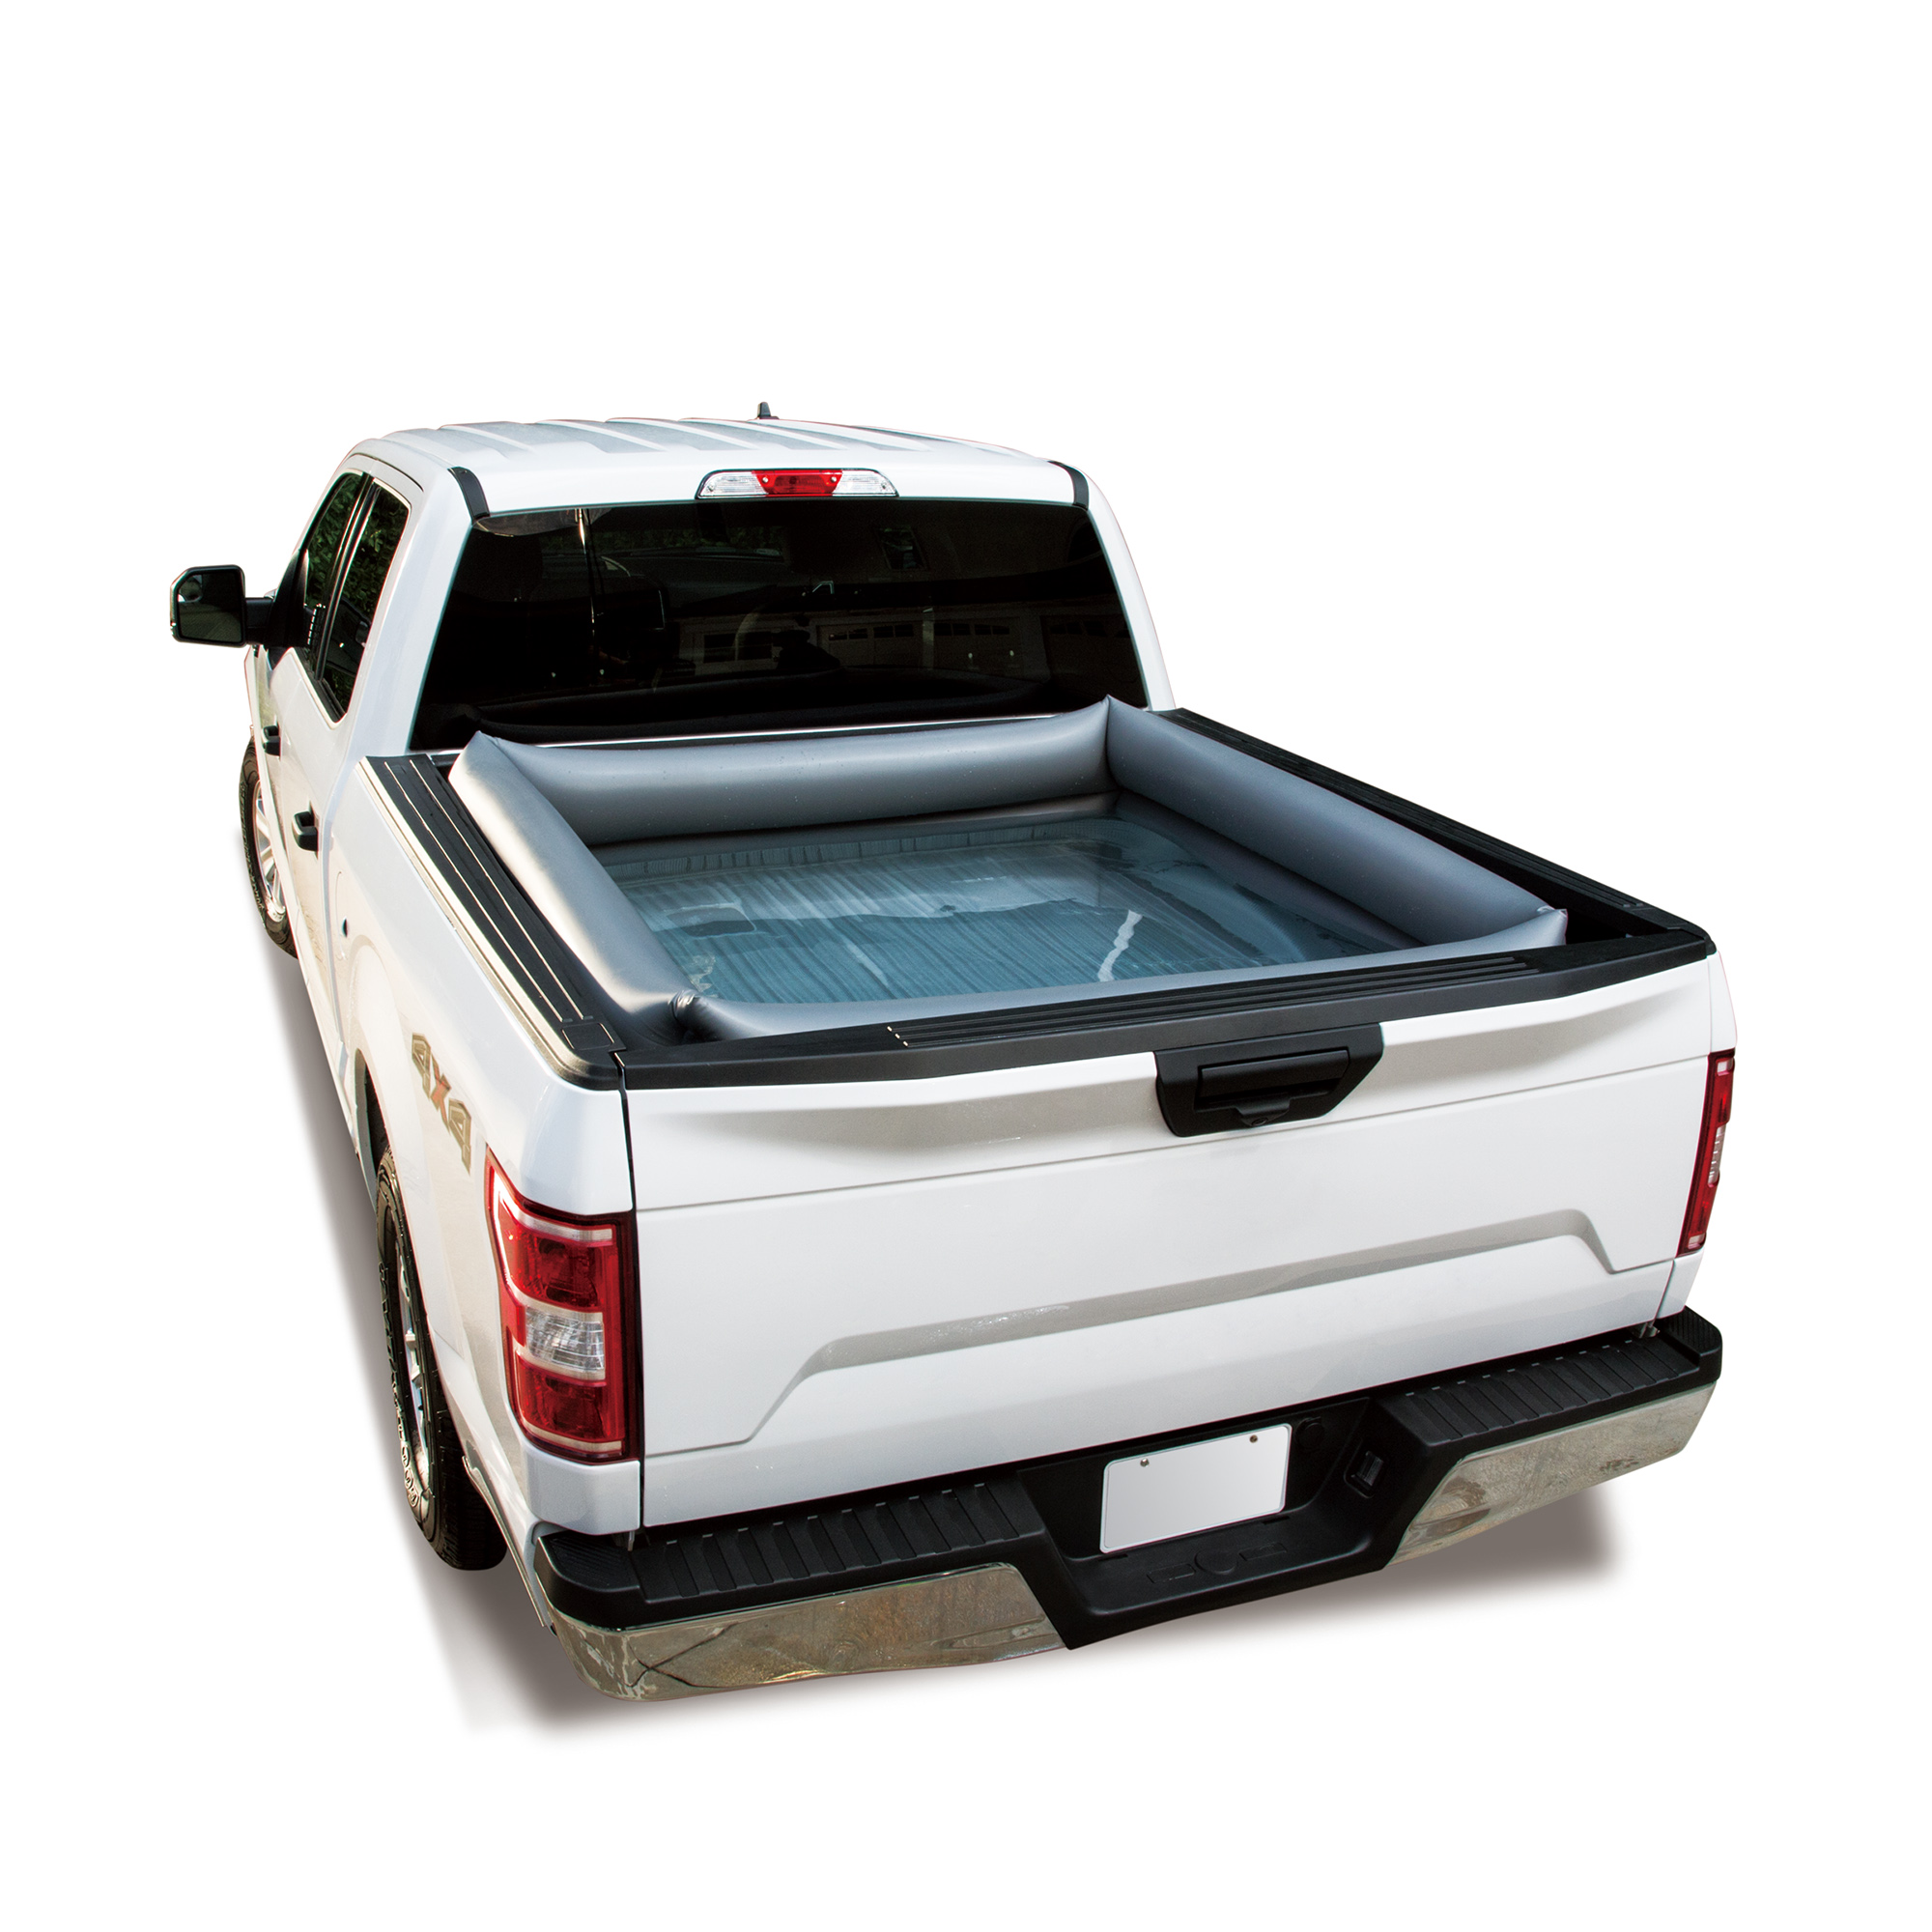 Summer Waves Rectangular Inflatable Truck Bed Pool, Gray, Adults, Unisex - image 1 of 7